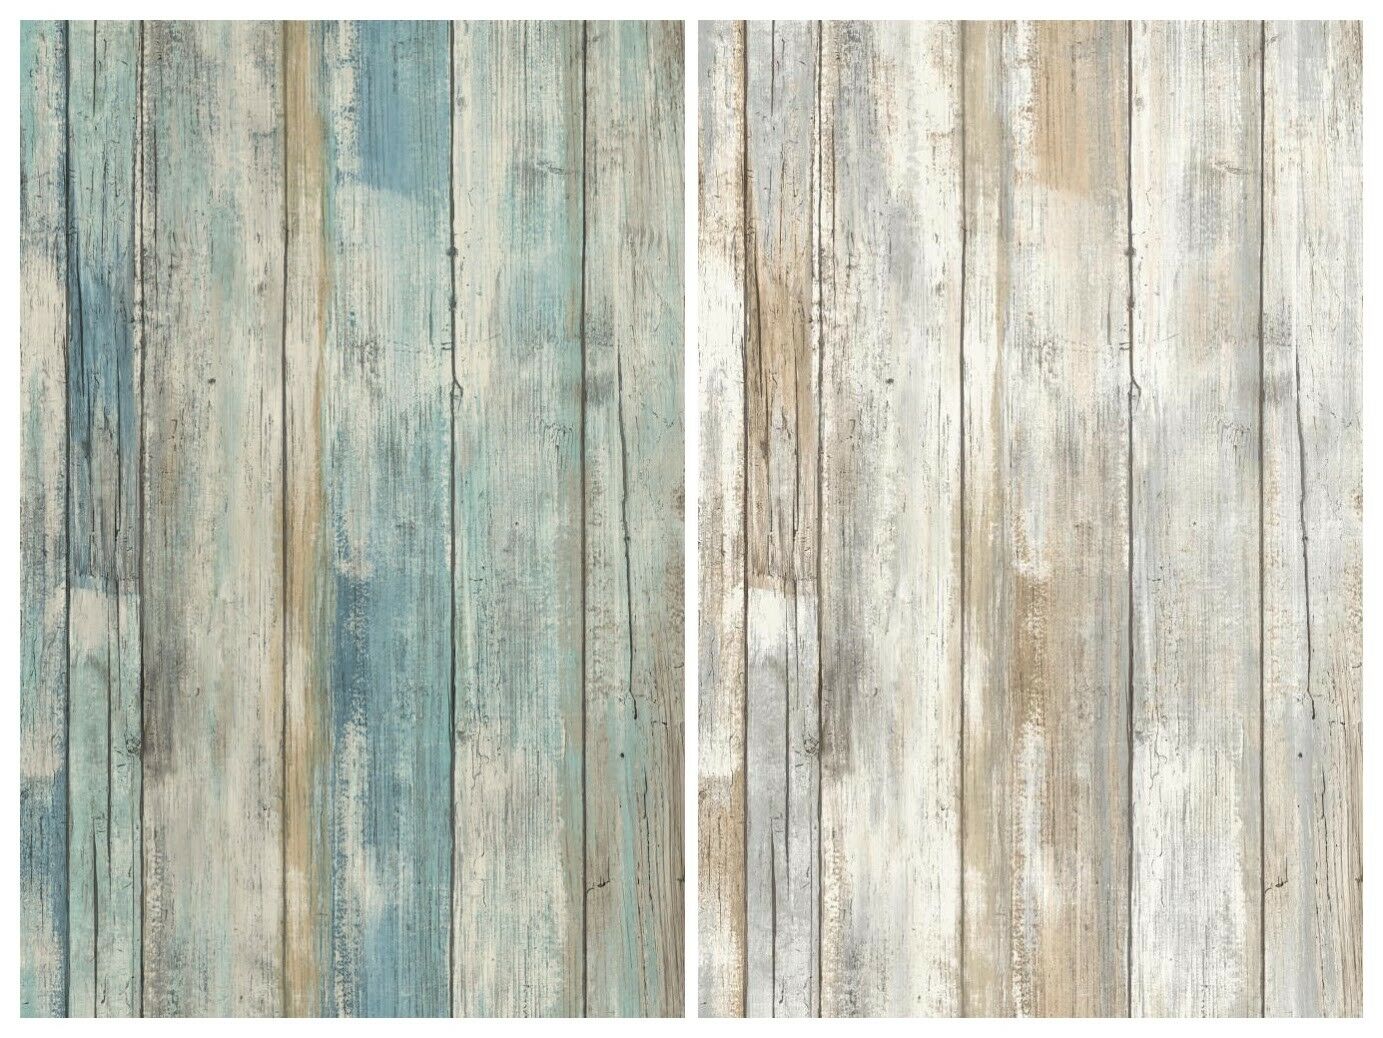 Distressed Wood Peel And Stick Wallpaper Gray Brown White 3d Realistic Barnwood